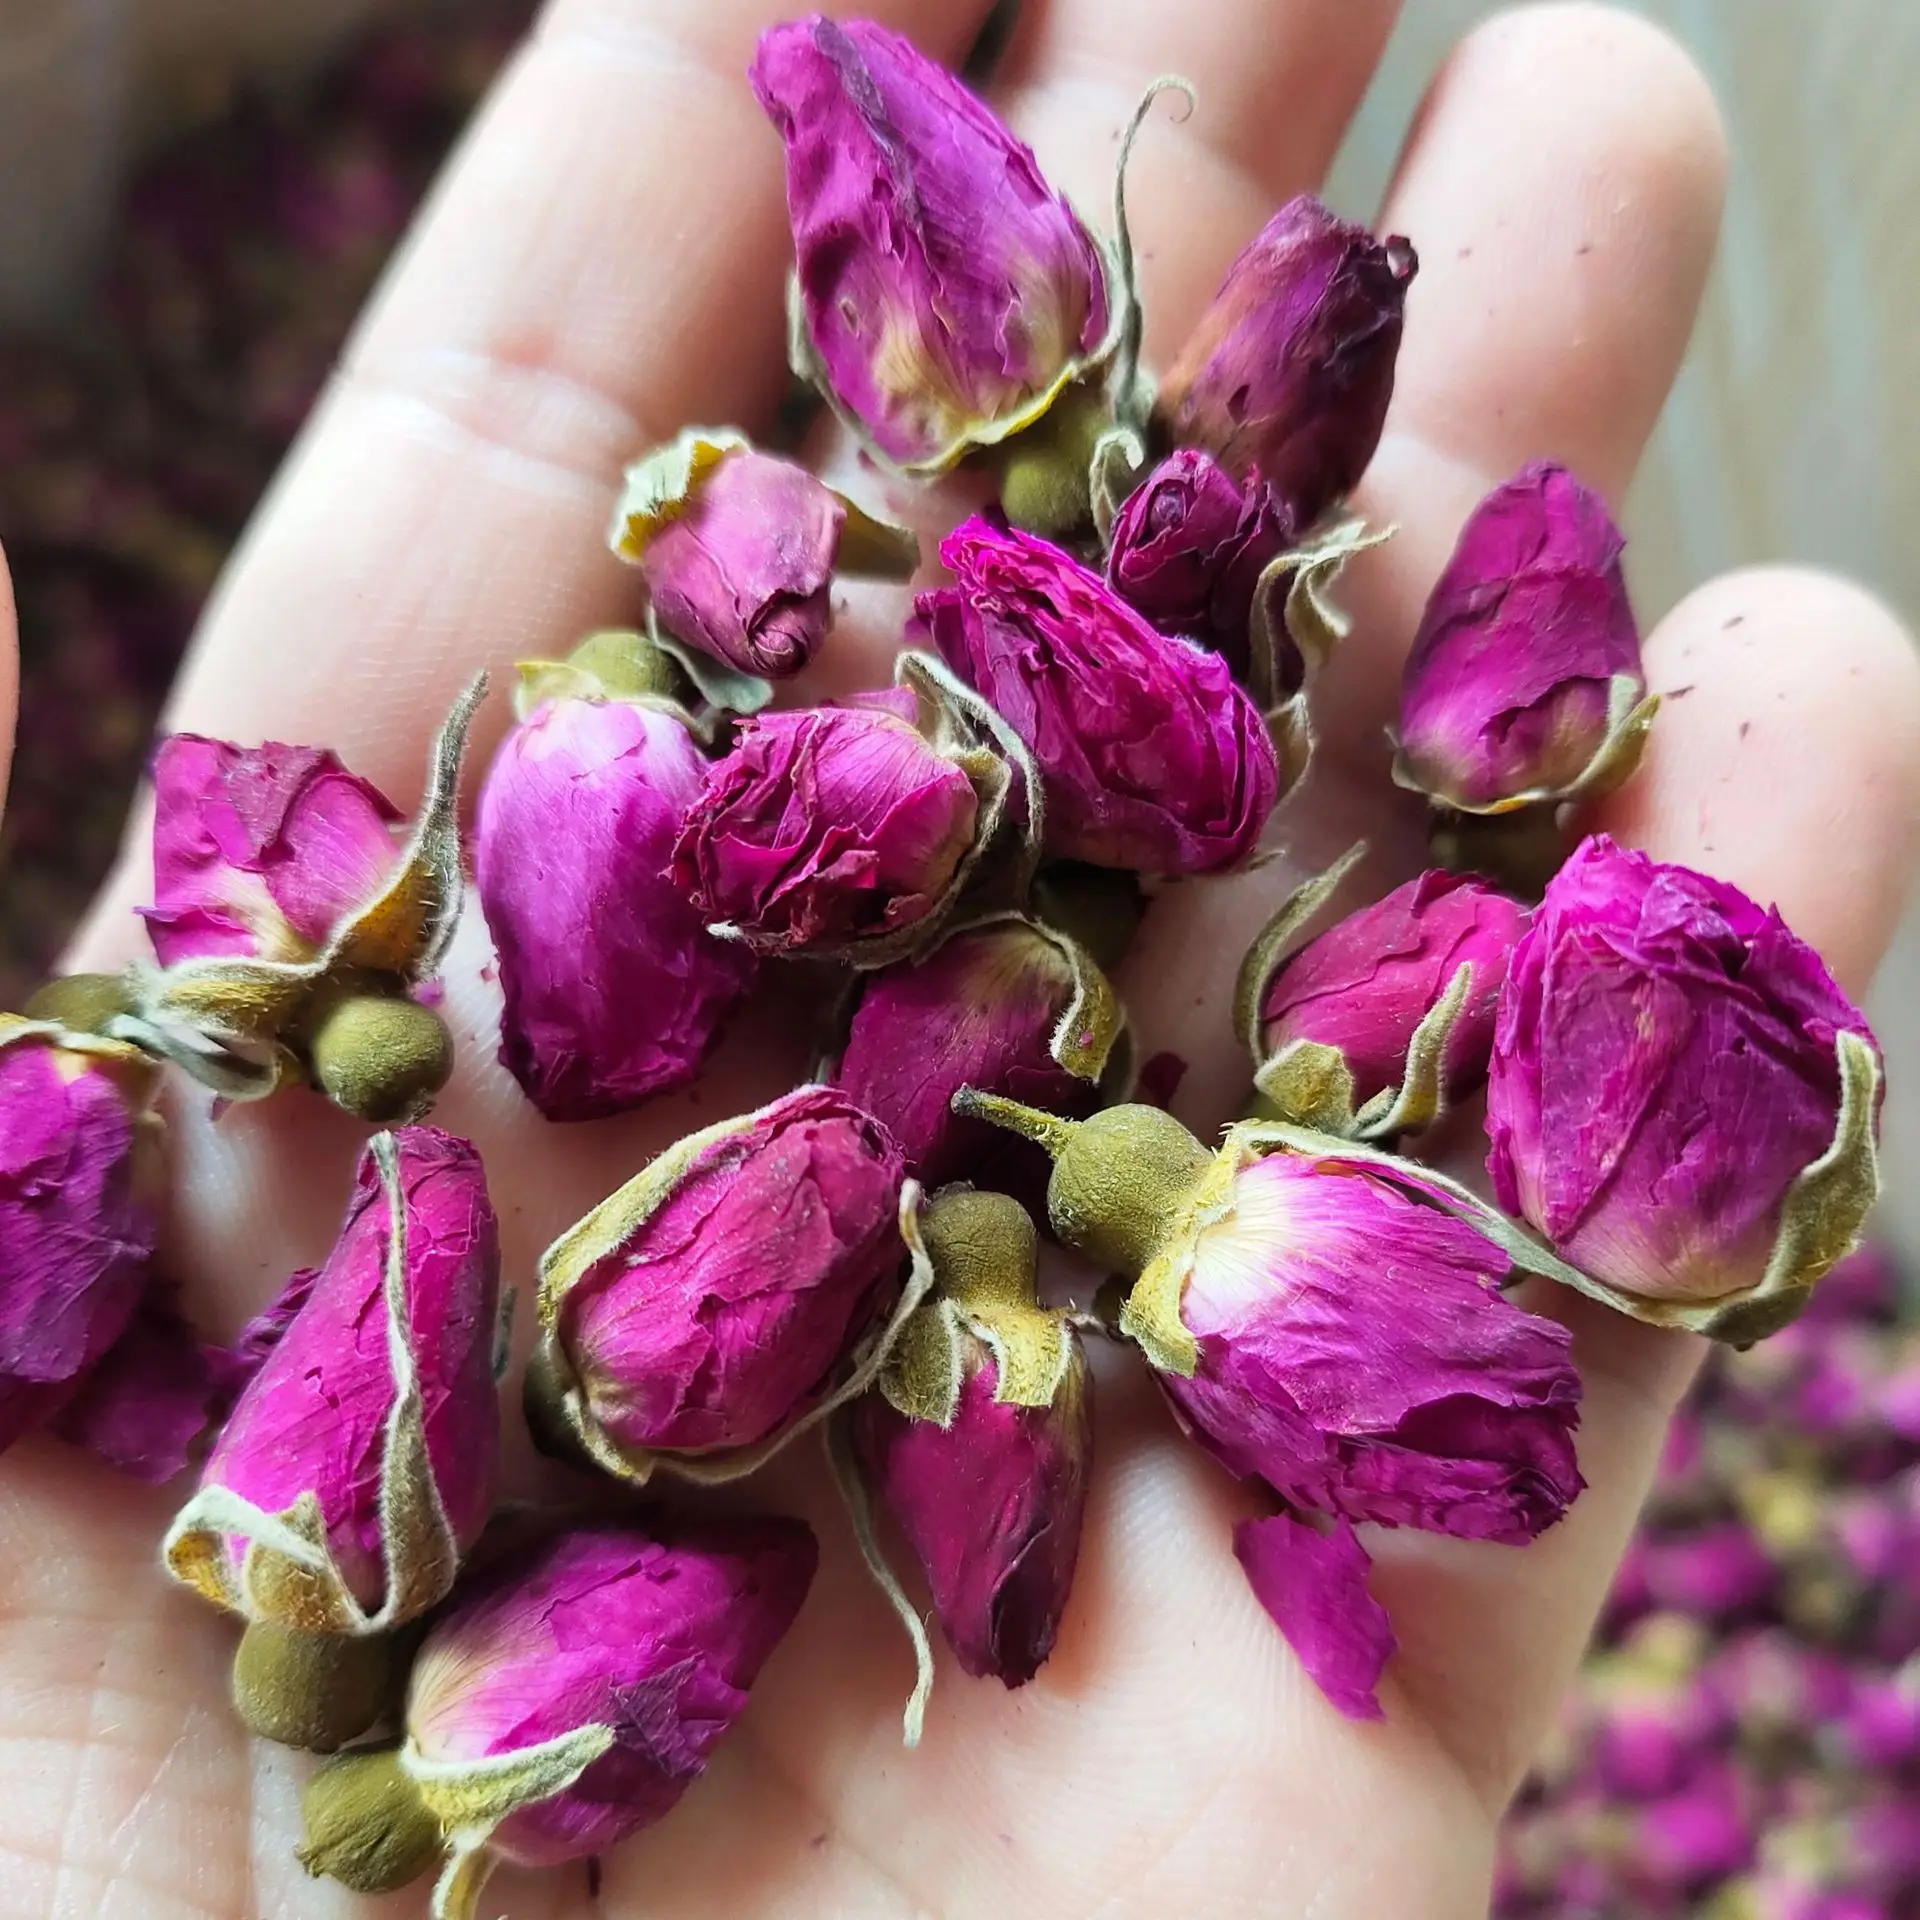 Dried Rose Buds (Edible & Dried) Red Real Flower Rose Buds for Tea Bath  Foot Bath Wedding Confetti Crafts Accessories - AliExpress